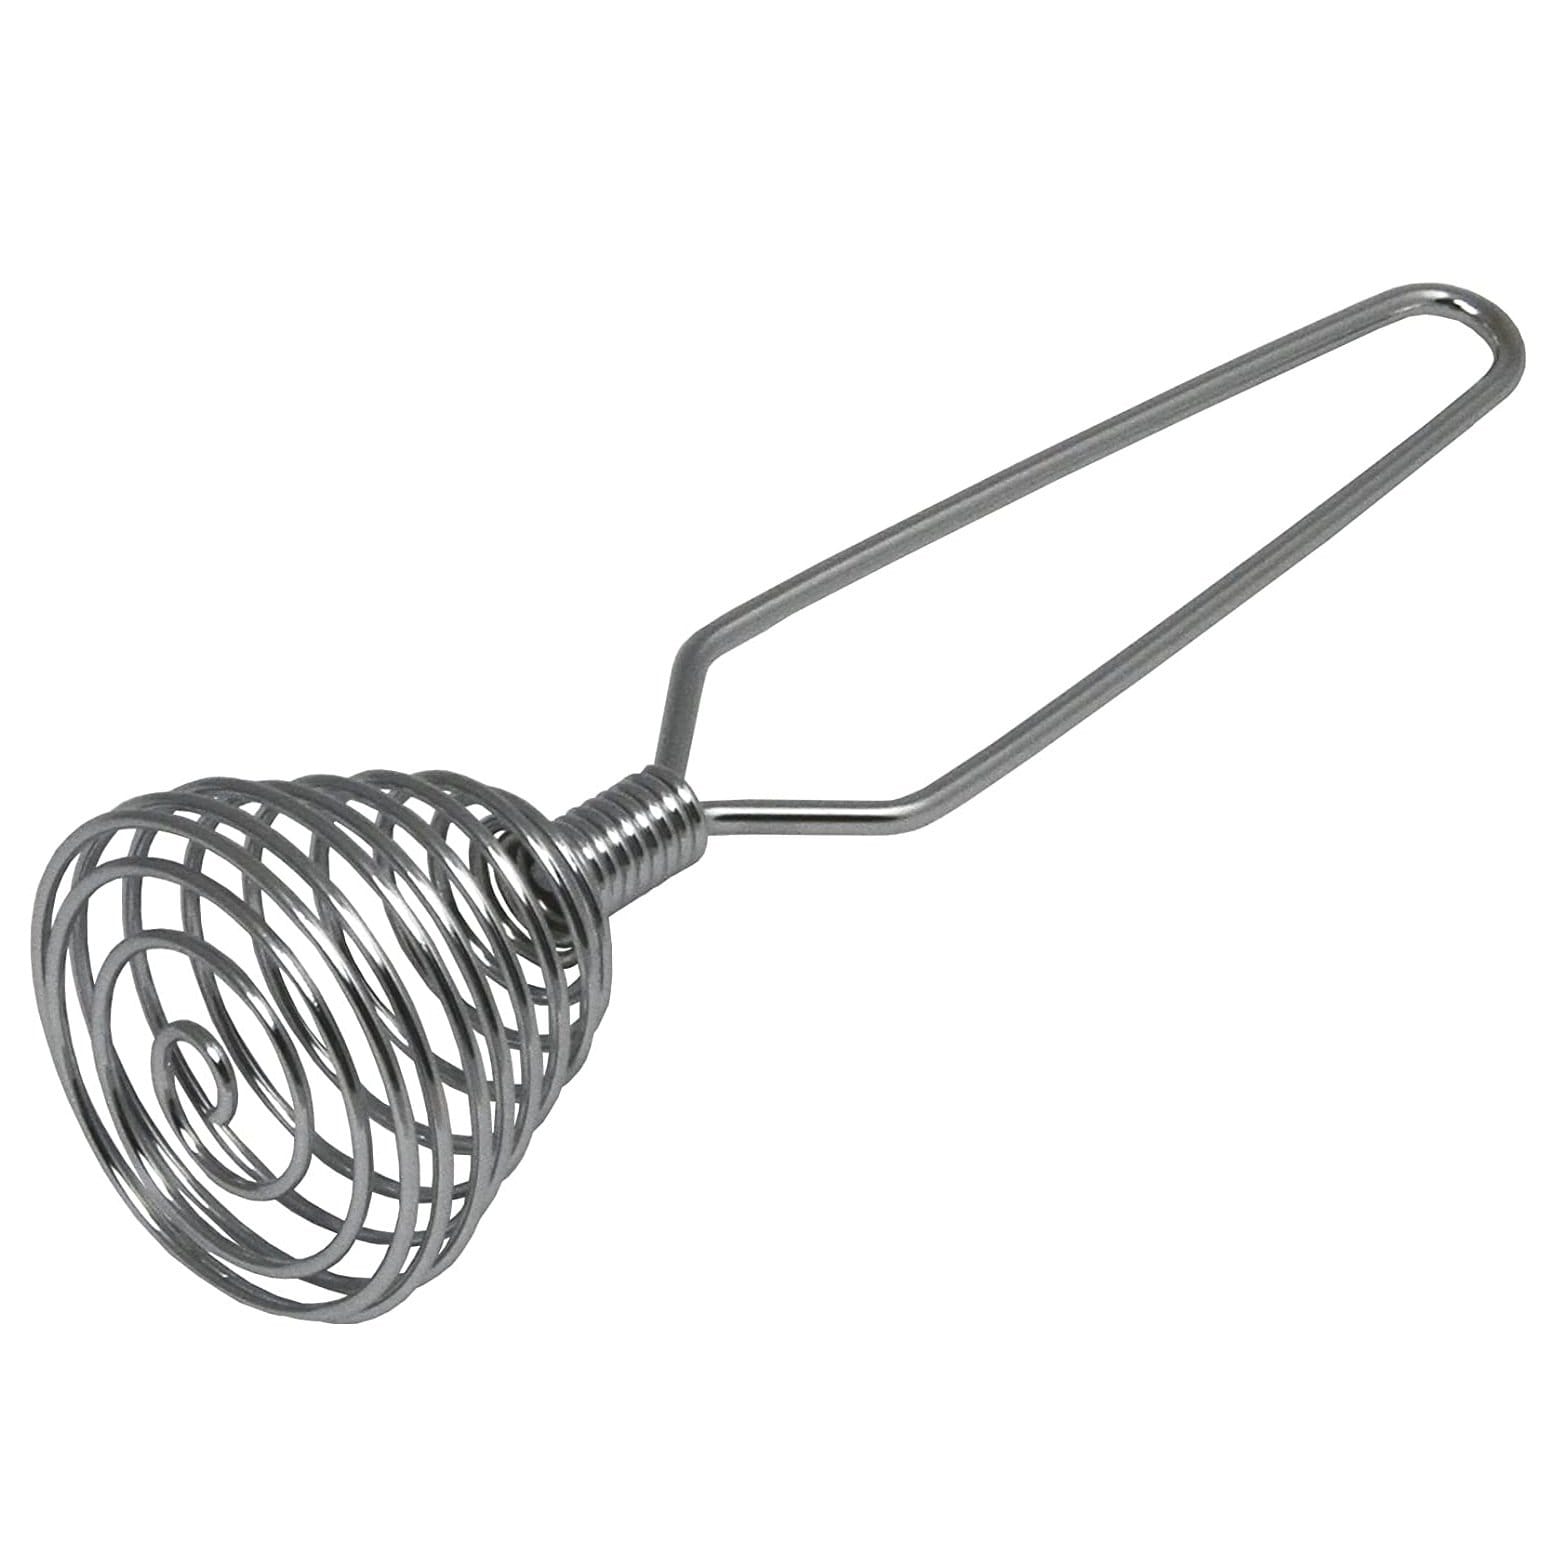 https://ak1.ostkcdn.com/images/products/is/images/direct/e3c0ca12bf61ffb6fe6e46df3380f29b97d3344b/Chef-Craft-7%22-Steel-Spring-Coil-Whisk%2C-French-Whisk---Great-For-Hand-Mixing-Eggs%2C-Cream%2C-Gravy.jpg